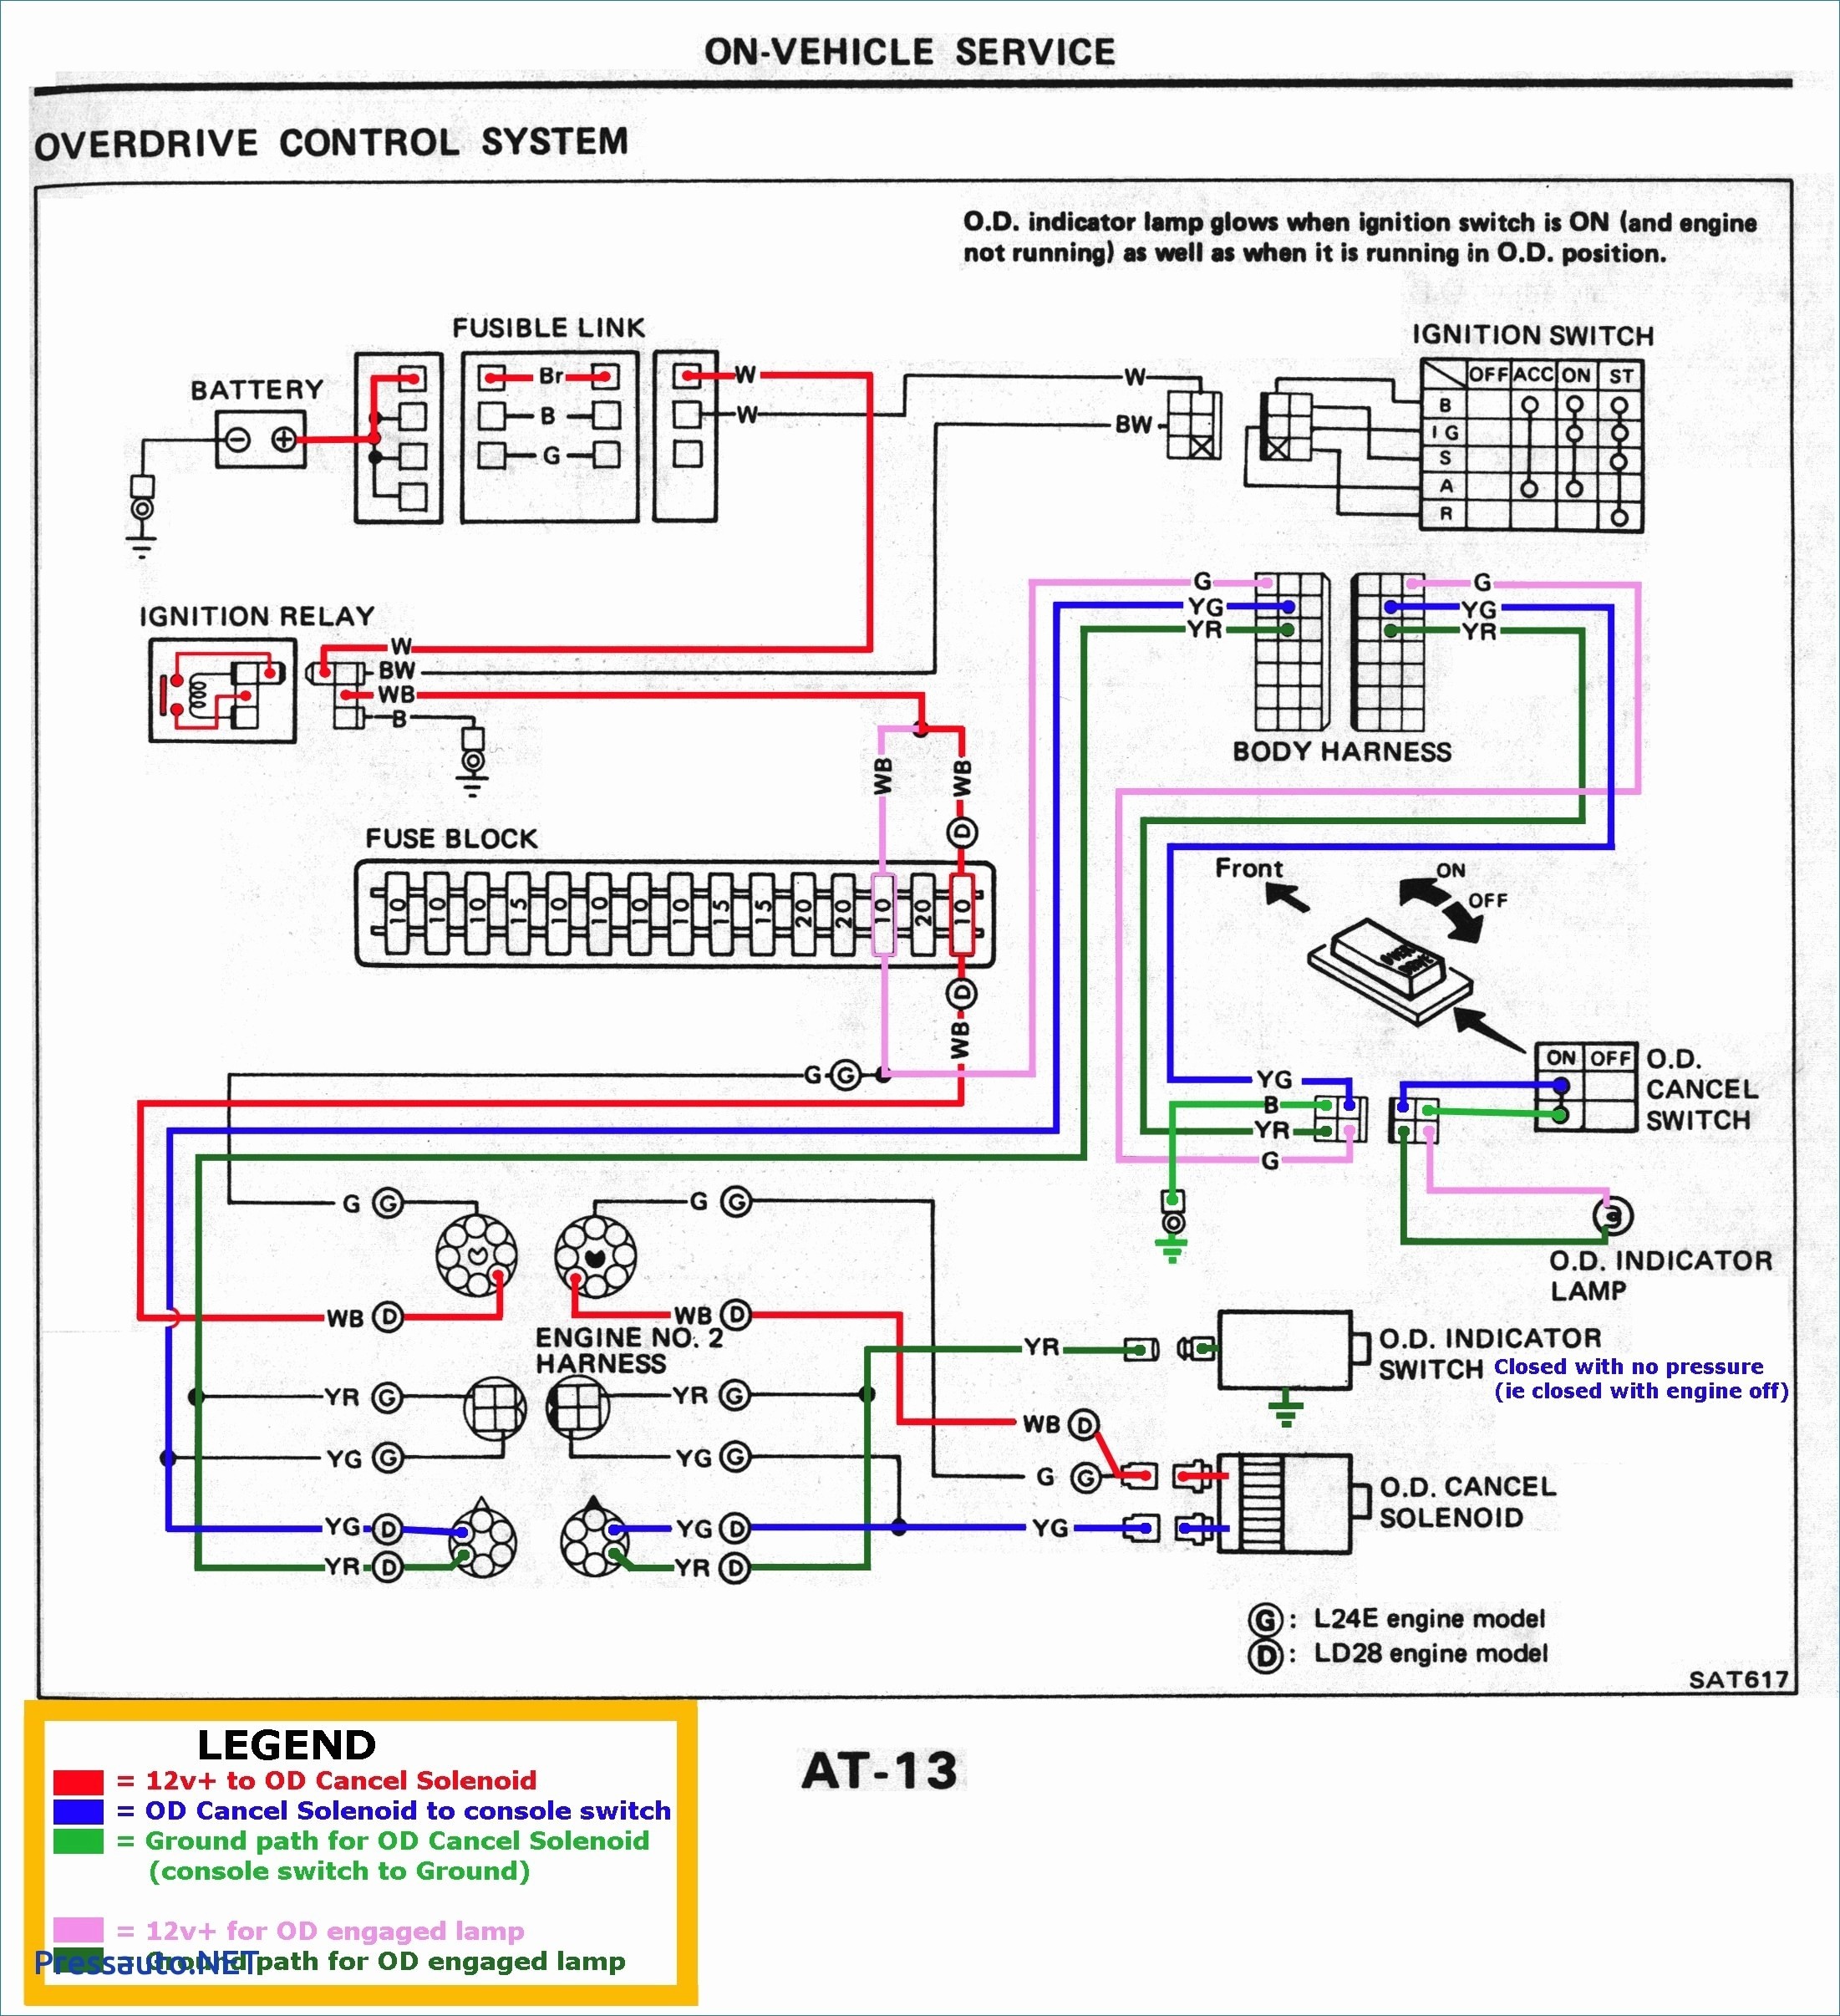 Full Size of Wiring Diagram Xbox 360 Power Supply Wiring Diagram Unique Ls Swap Wiring